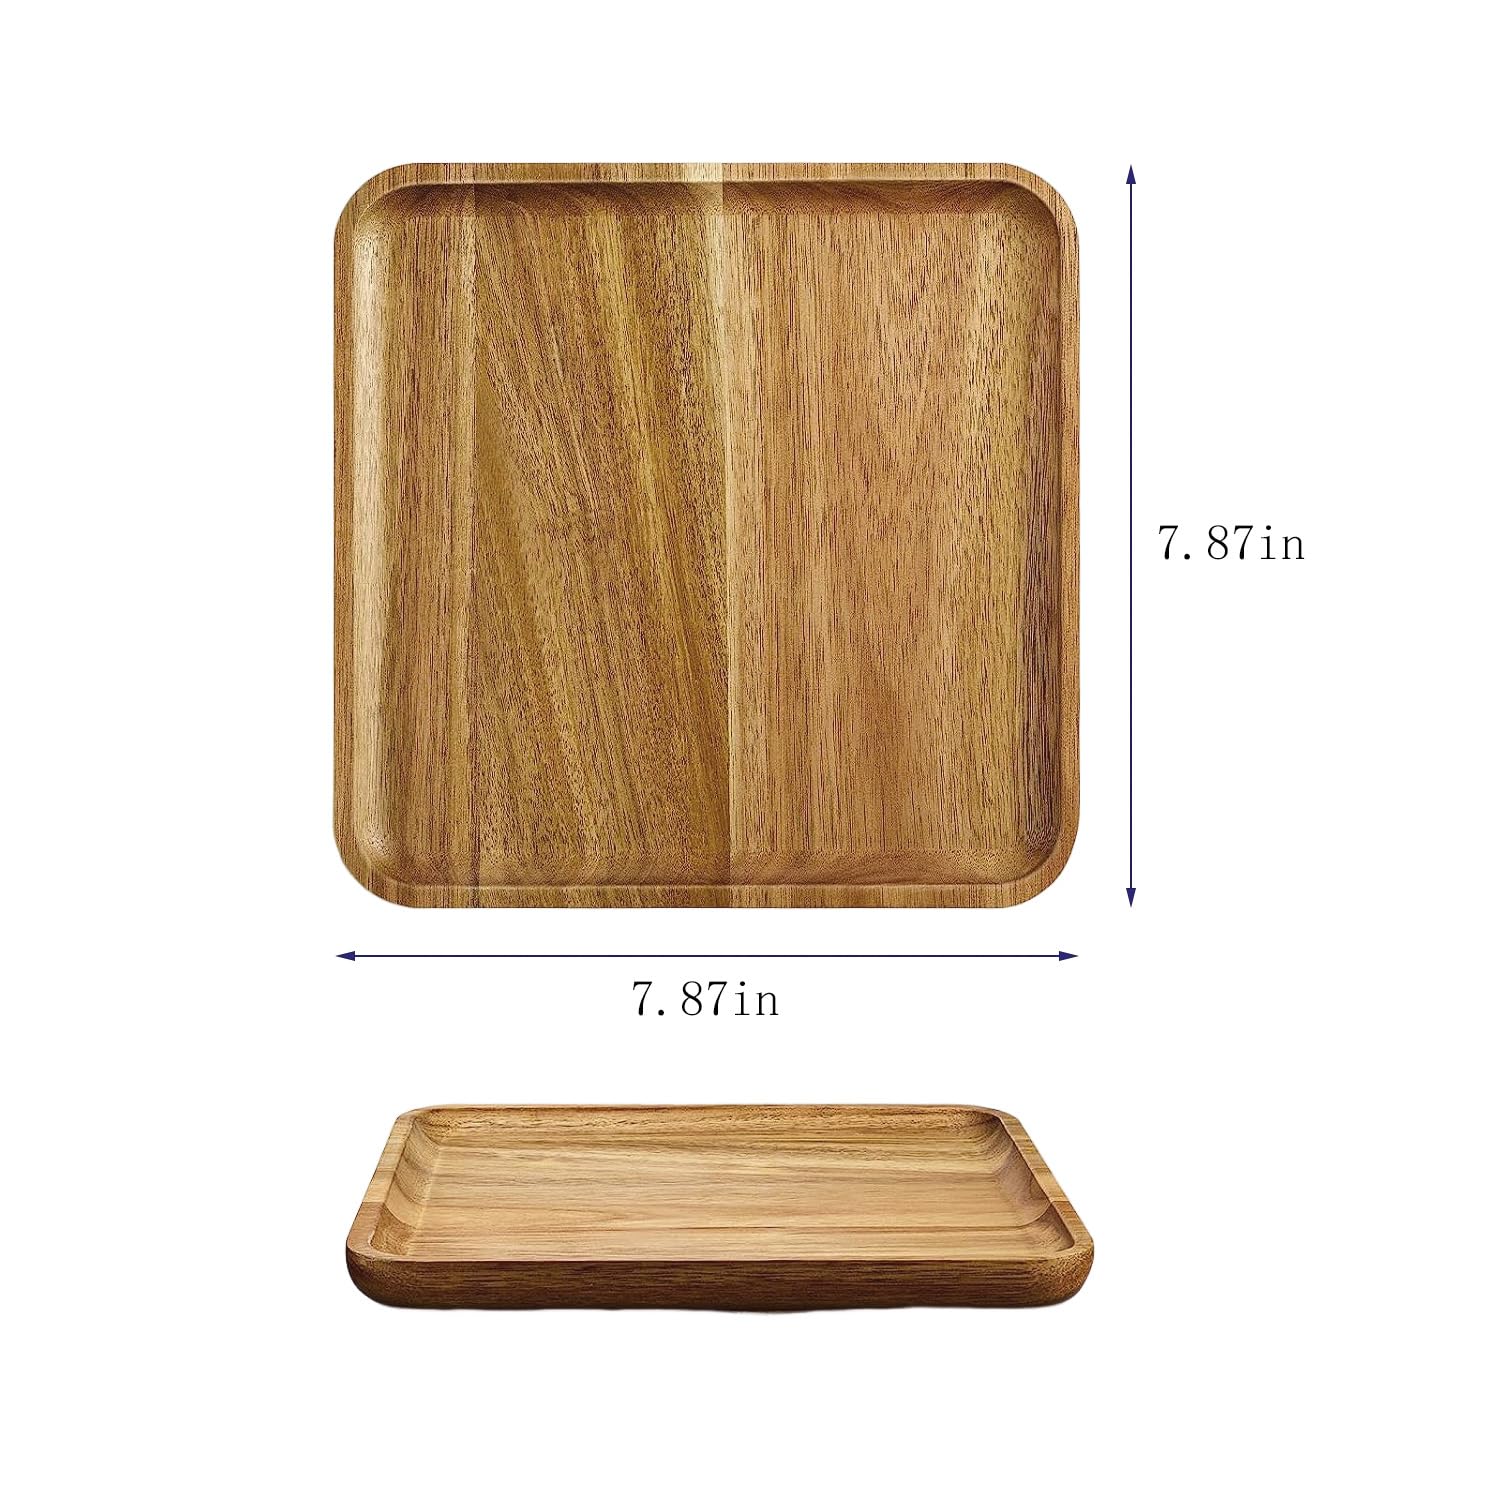 Square Acacia Wood Plate,Wooden Trays Serving Platter Dinner Server Tray Dessert Cookie Snack Platters Charcuterie Board,7.8" x 7.8"